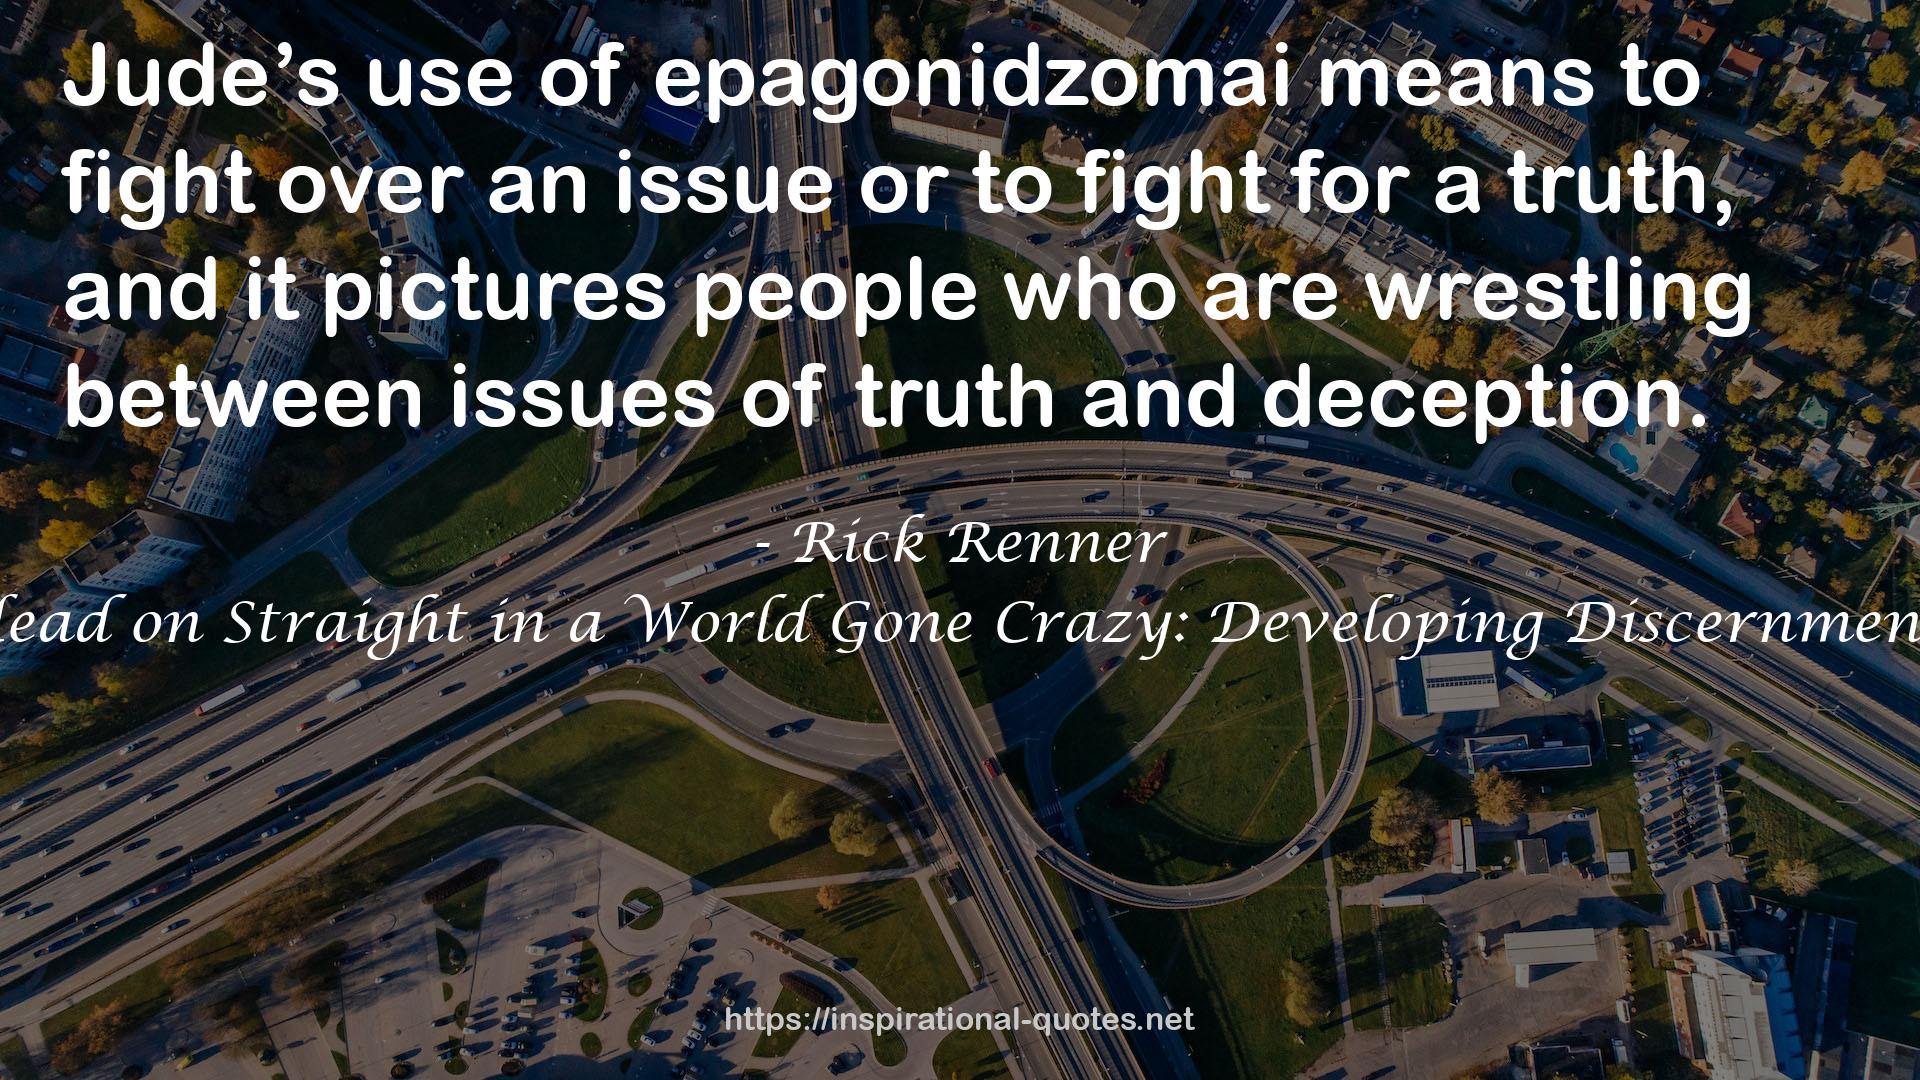 Rick Renner QUOTES